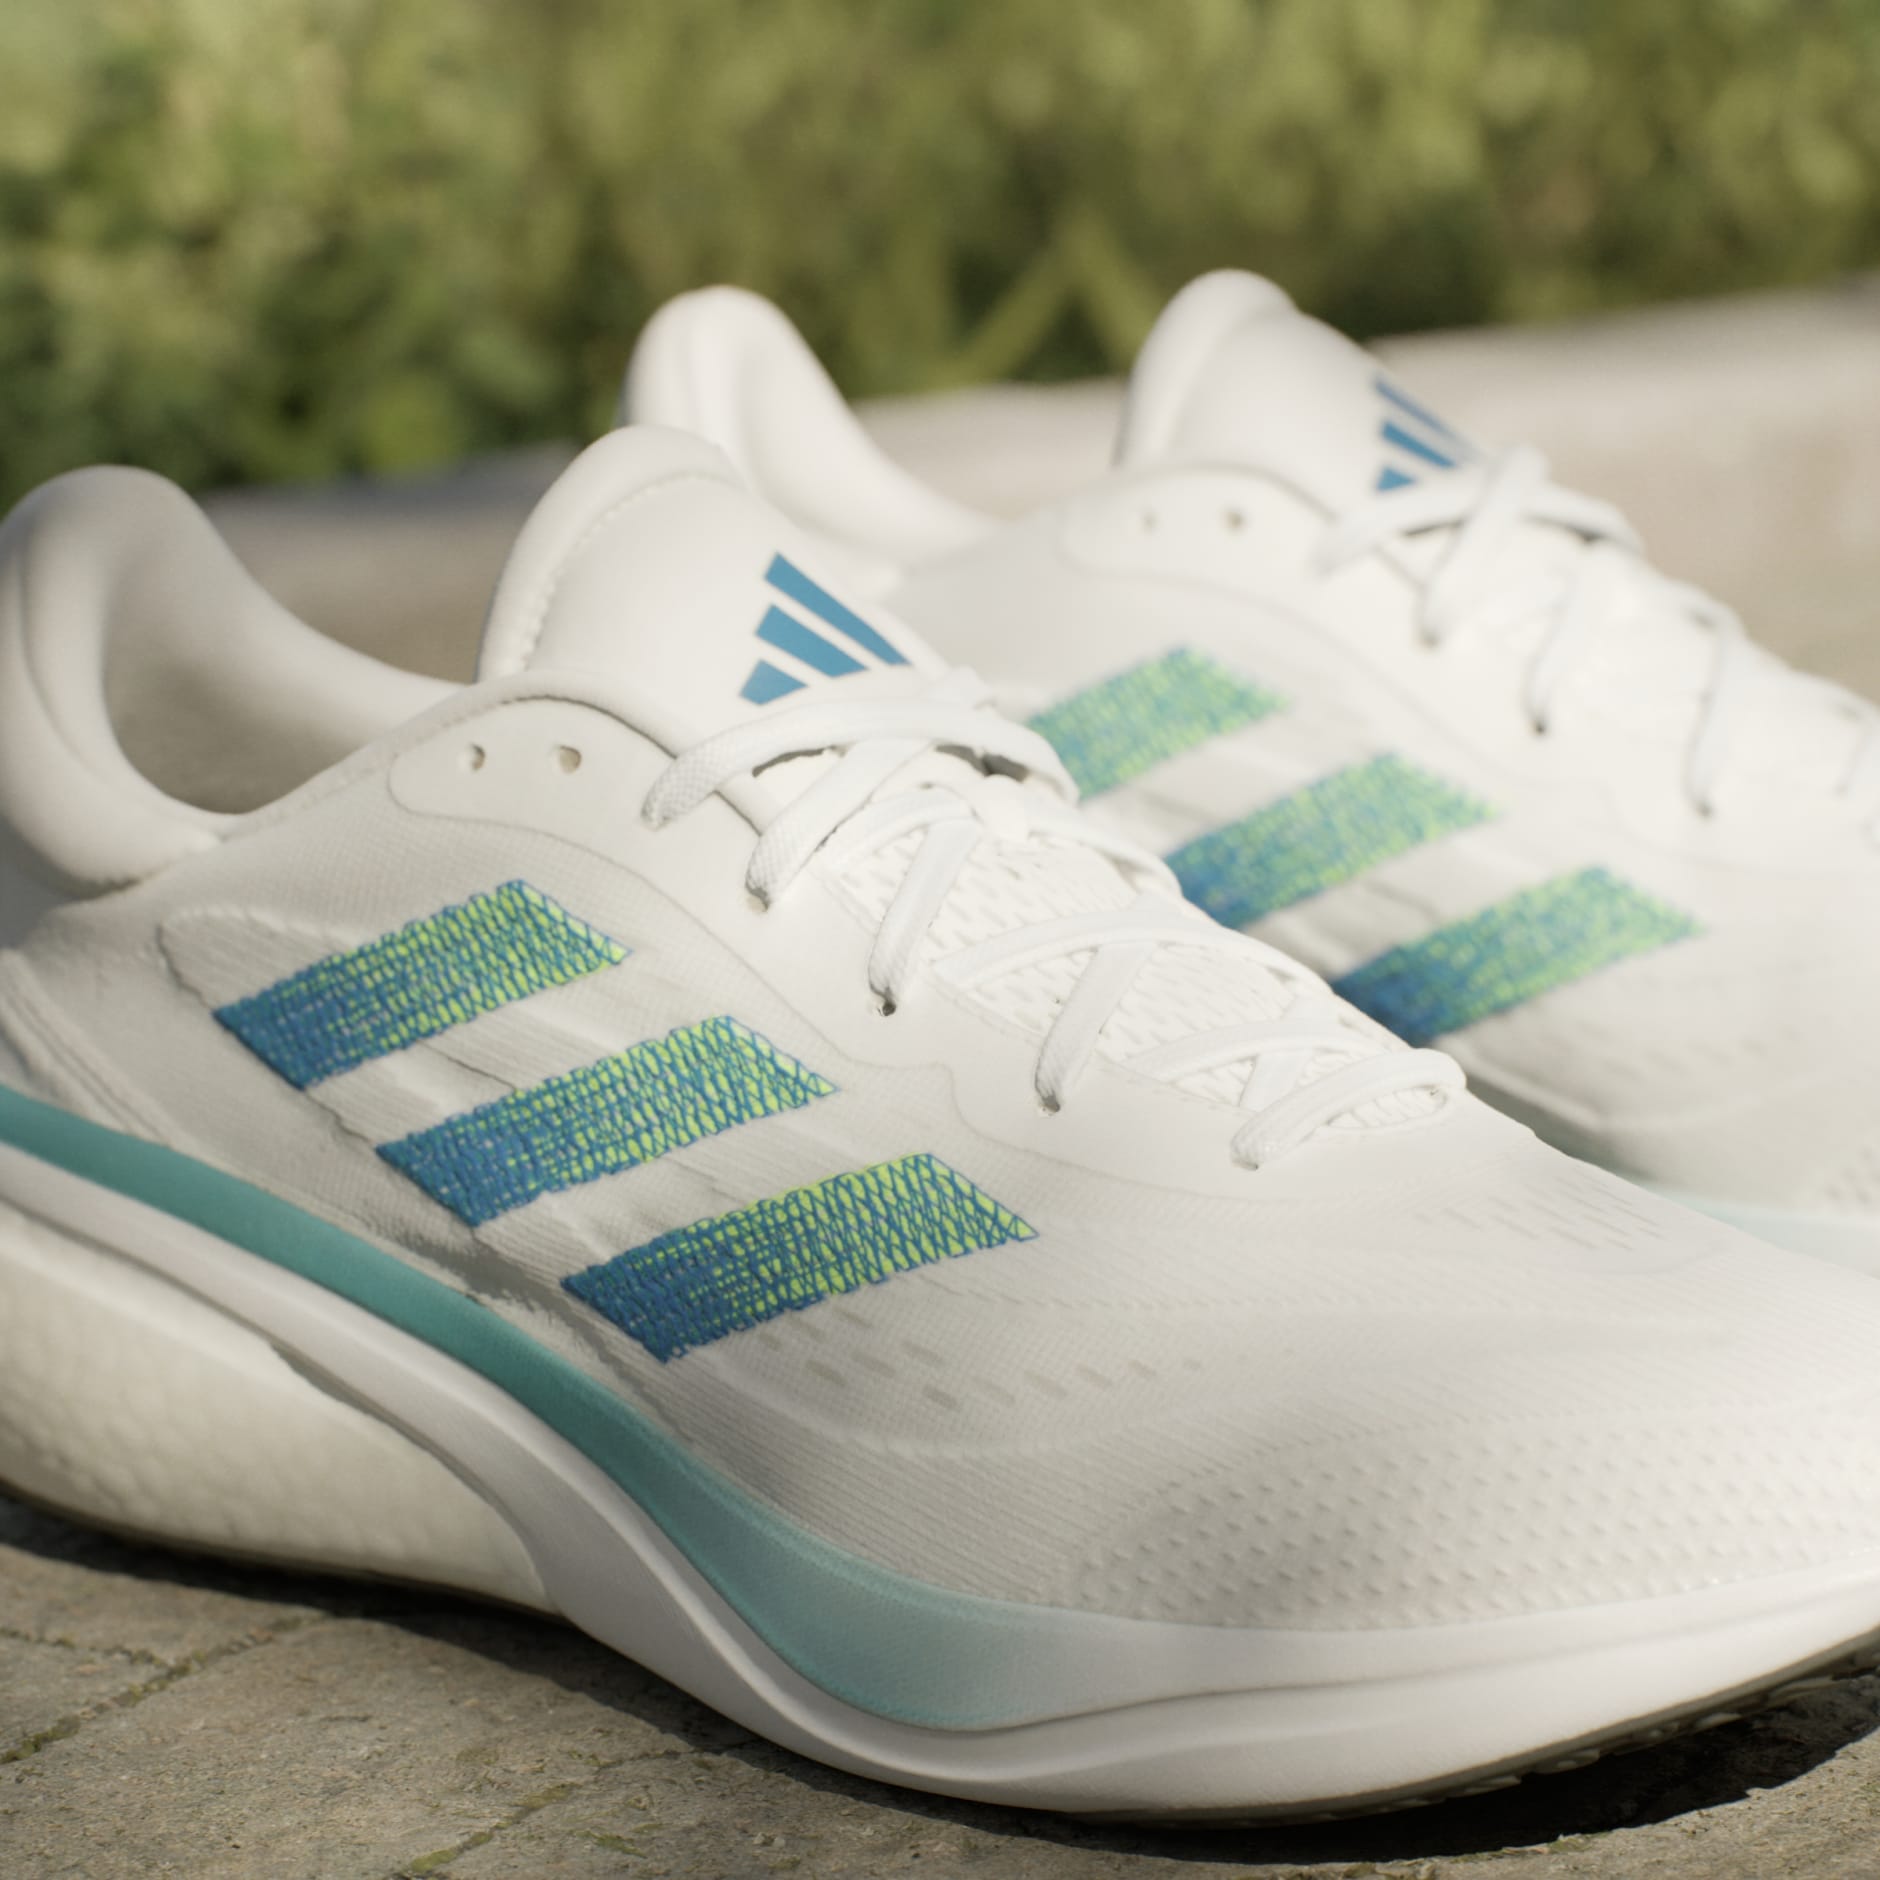 Shoes - Supernova 3 Running Shoes - White | adidas South Africa